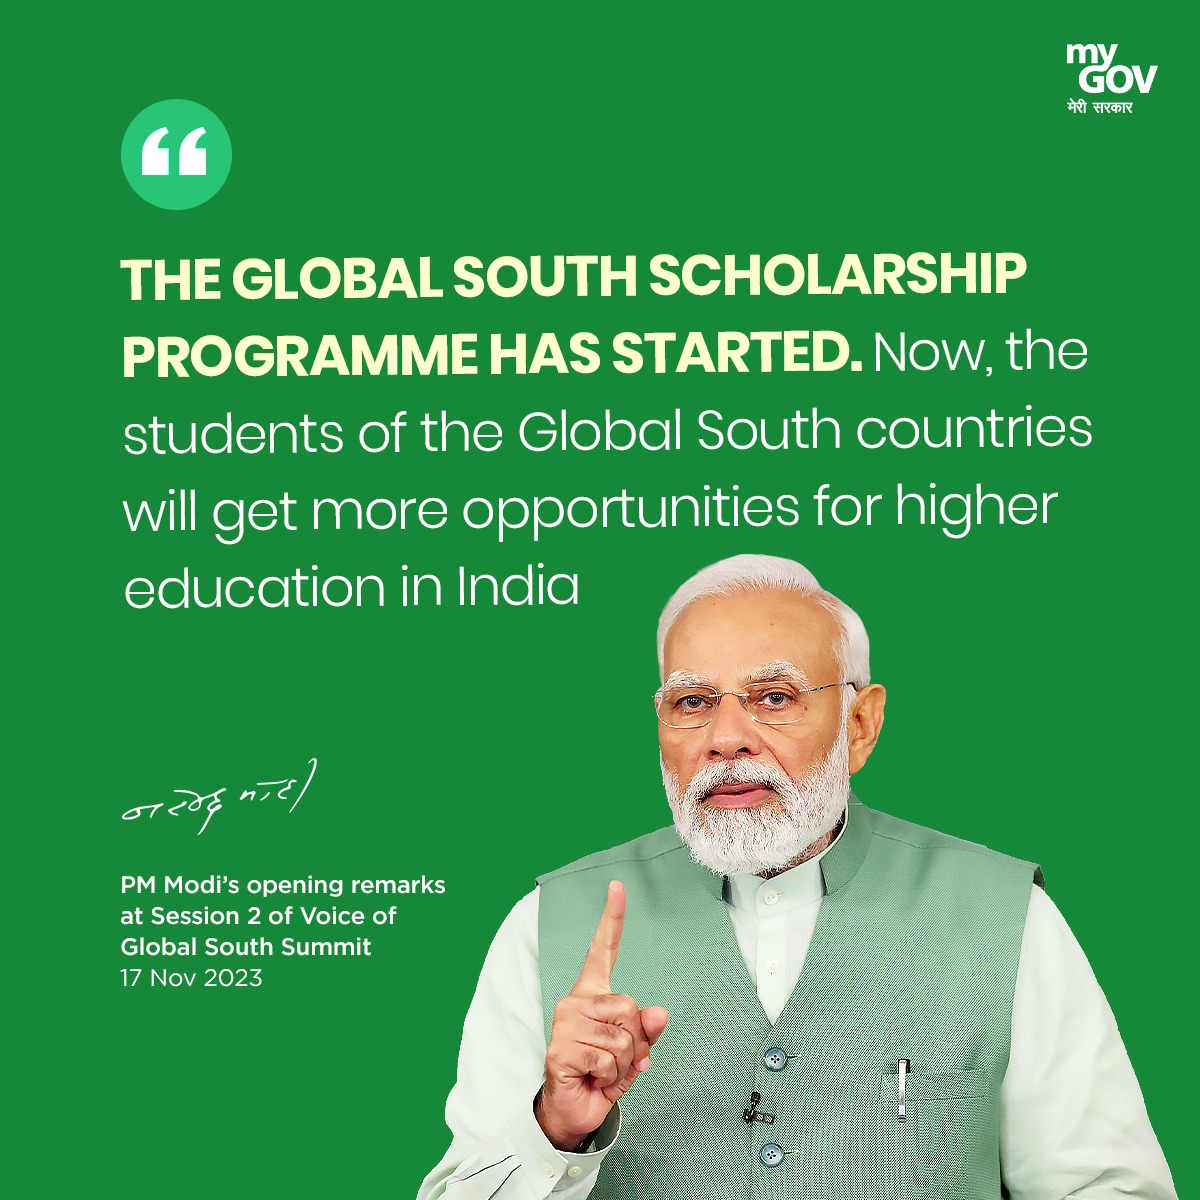 The Global South scholarship programme has started

#VoiceOfGlobalSouth #GlobalSouthSummit